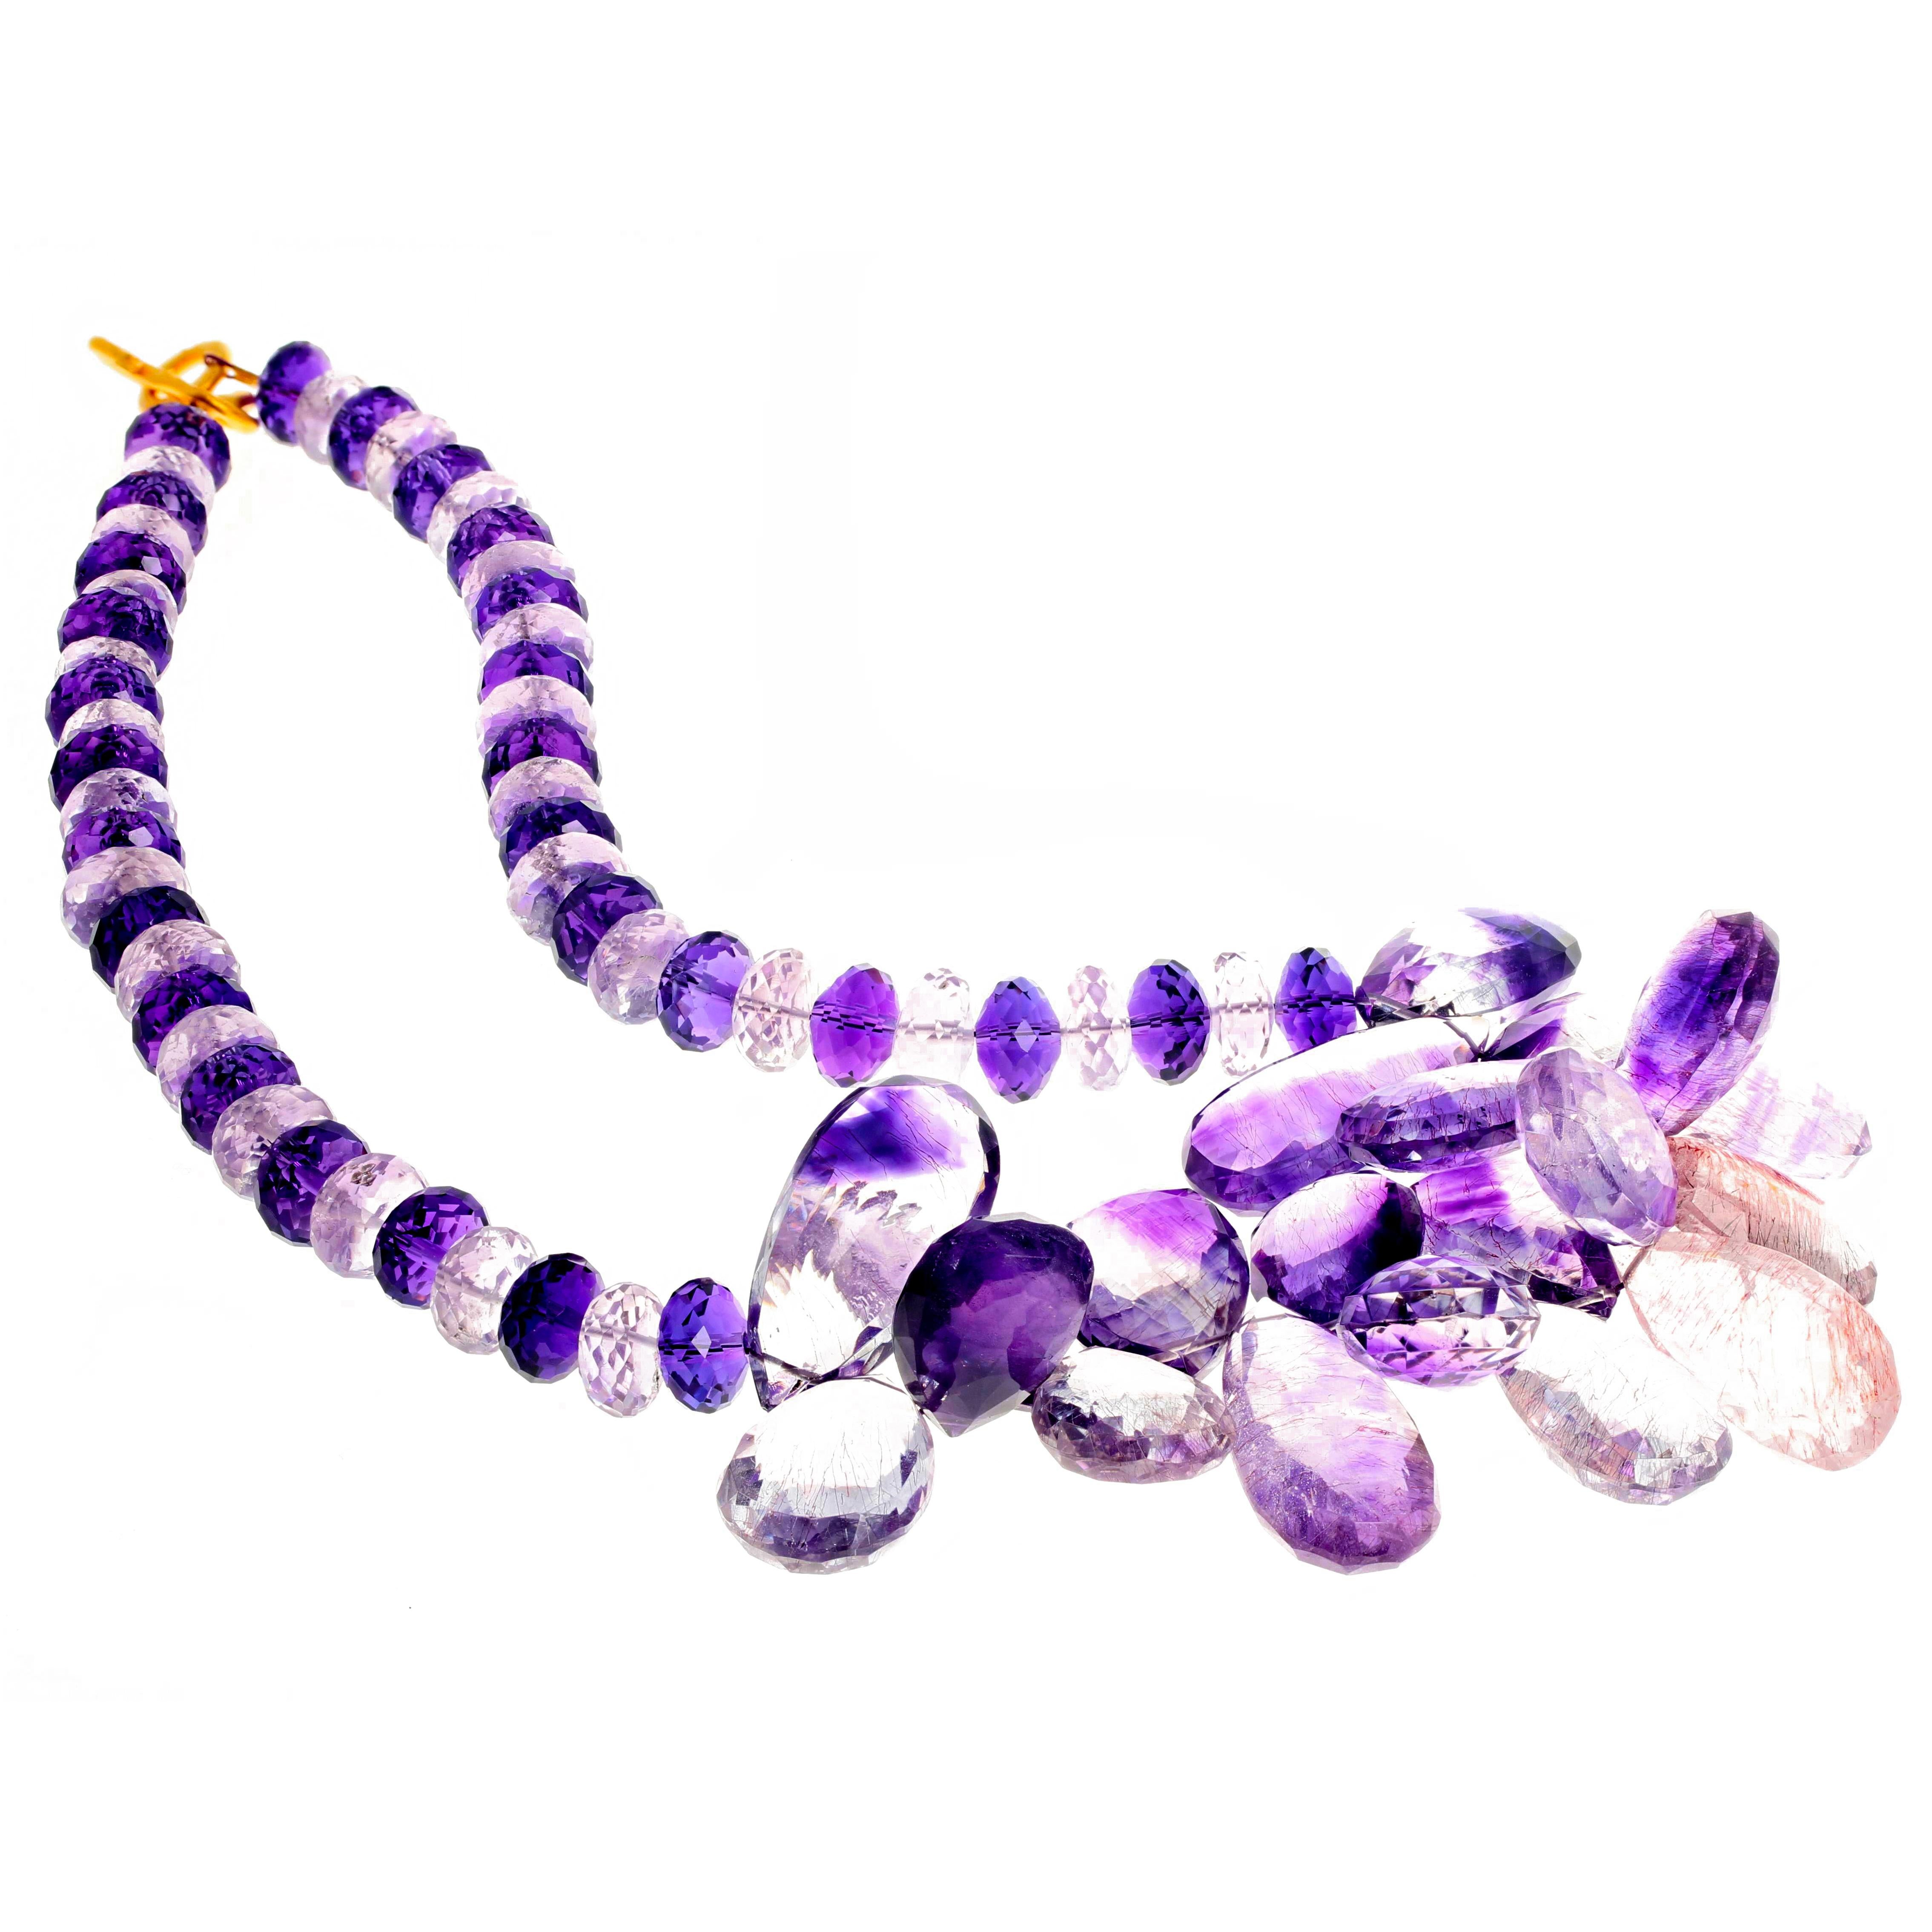 Gemjunky BoHo Chic Glittering Amethysts Mixed And Matched Impressive Necklace